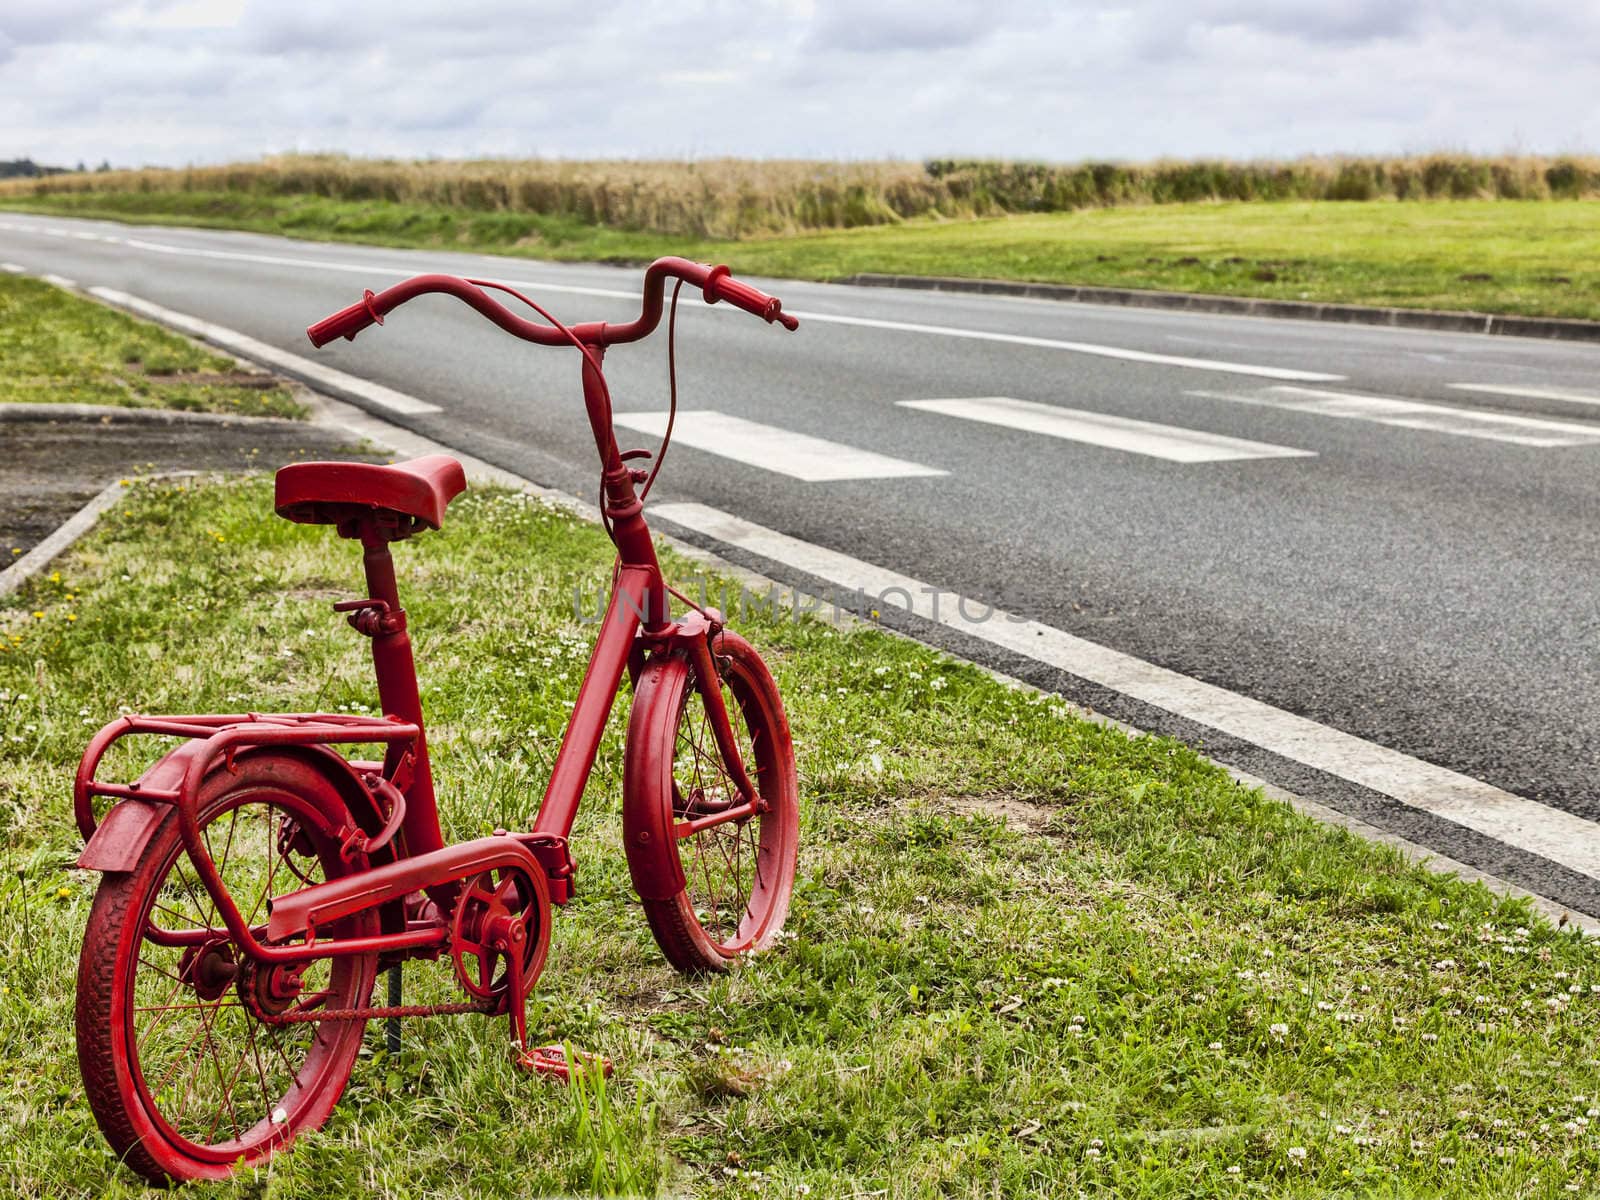 Red Bicycle on the Roadside by RazvanPhotography